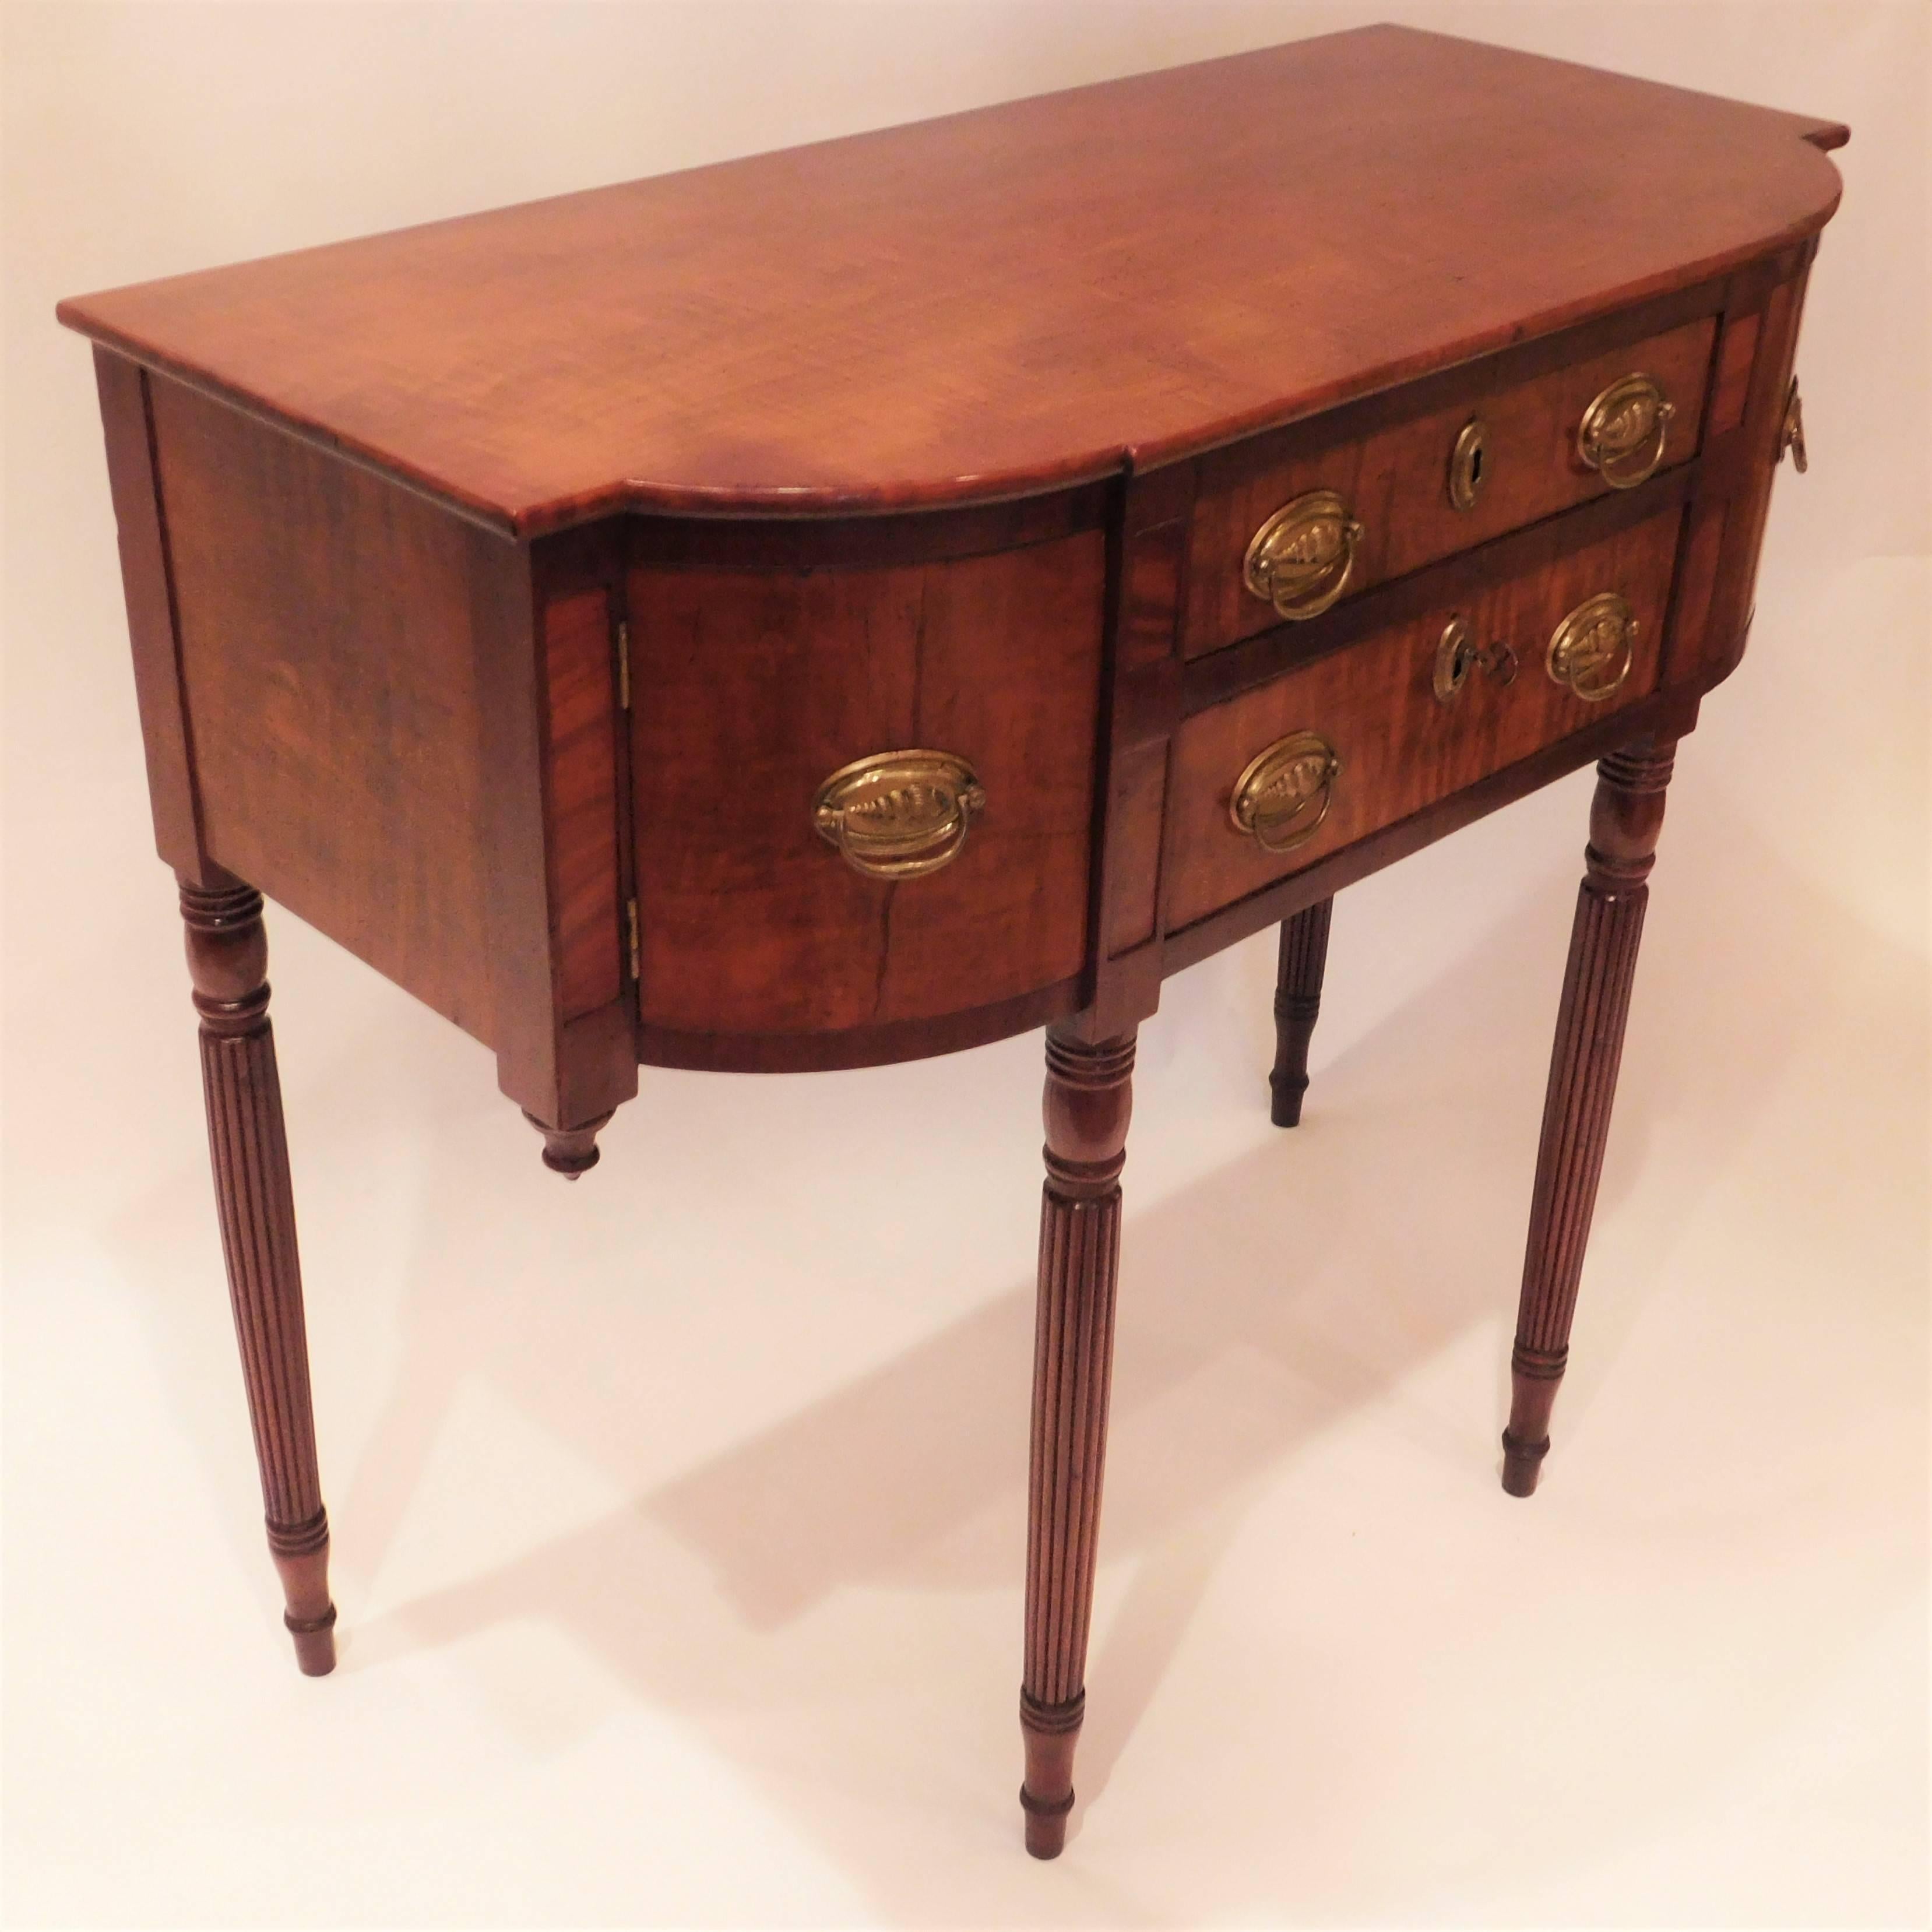 Federal Petite Sheraton Sideboard or Console, Probably New England, circa 1820